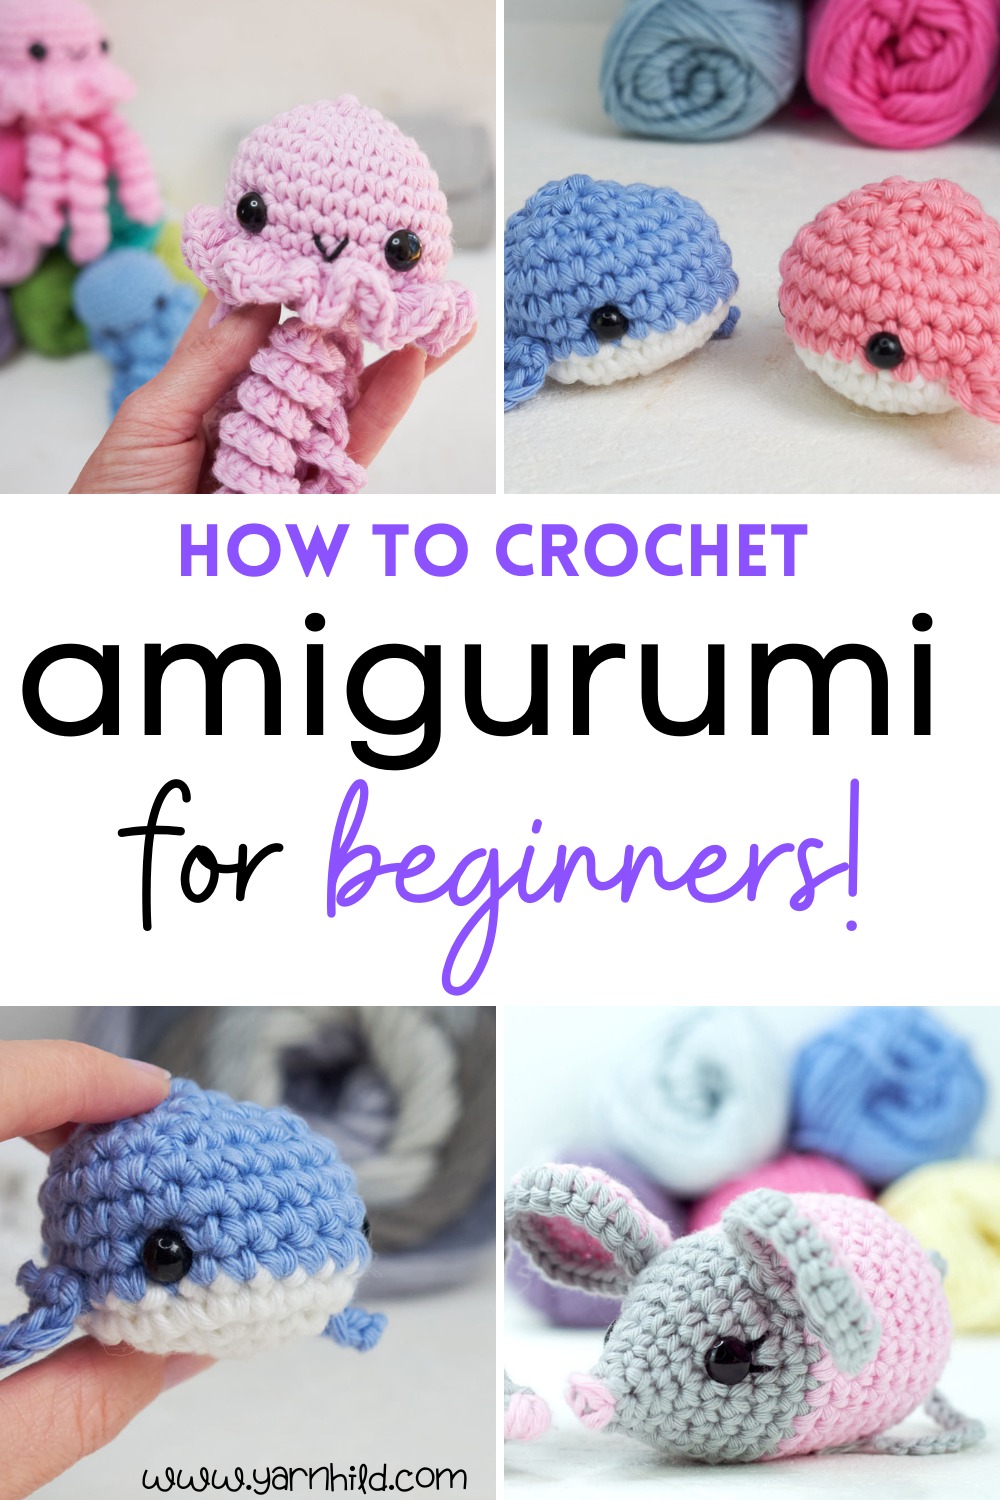 How to Crochet: Amigurumi Basics : 6 Steps (with Pictures) - Instructables